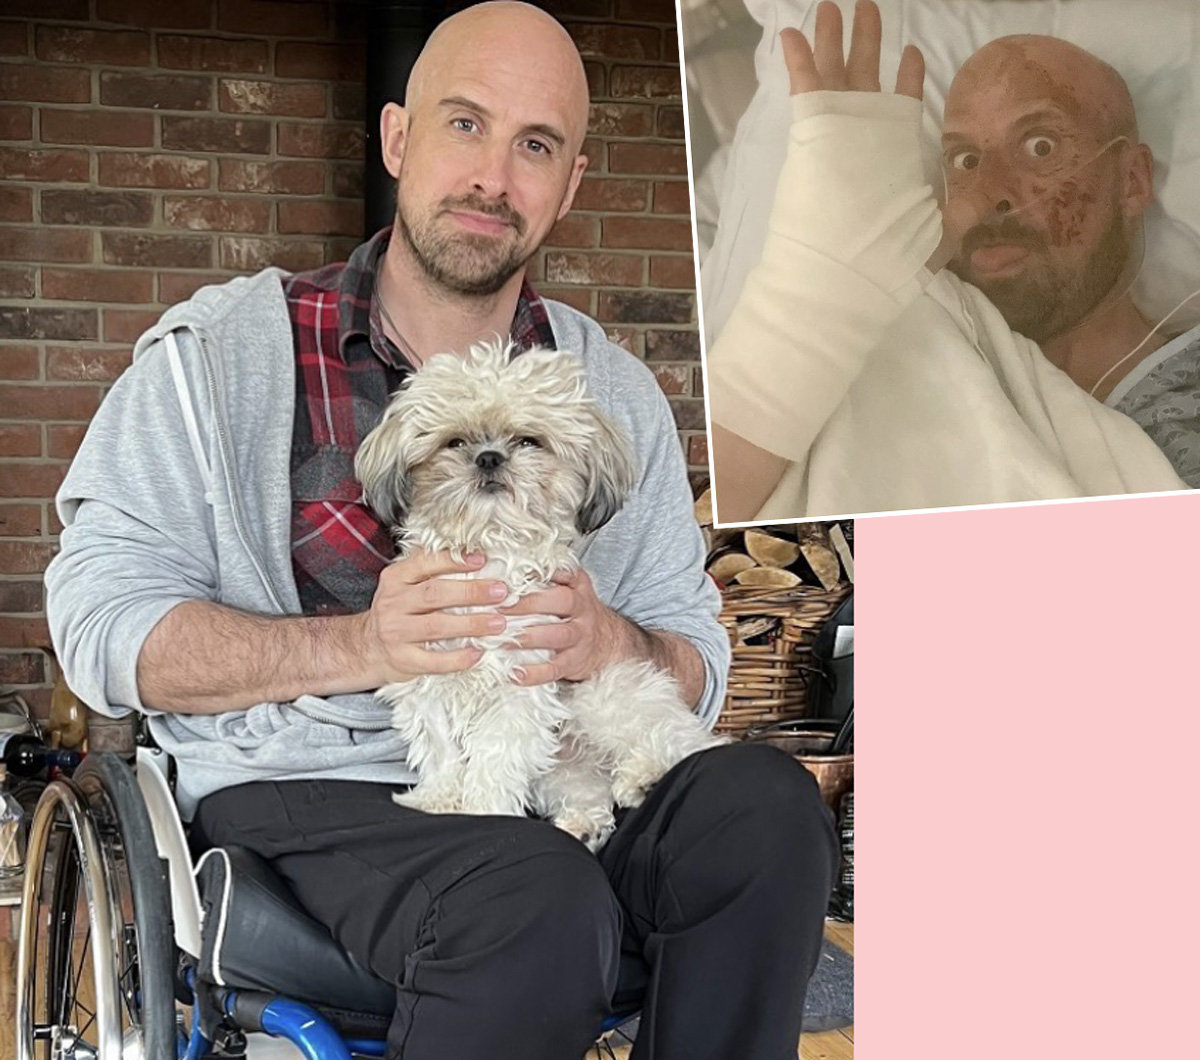 #America’s Got Talent Stuntman Reveals He’s Paralyzed From The Waist Down — And It’s Permanent